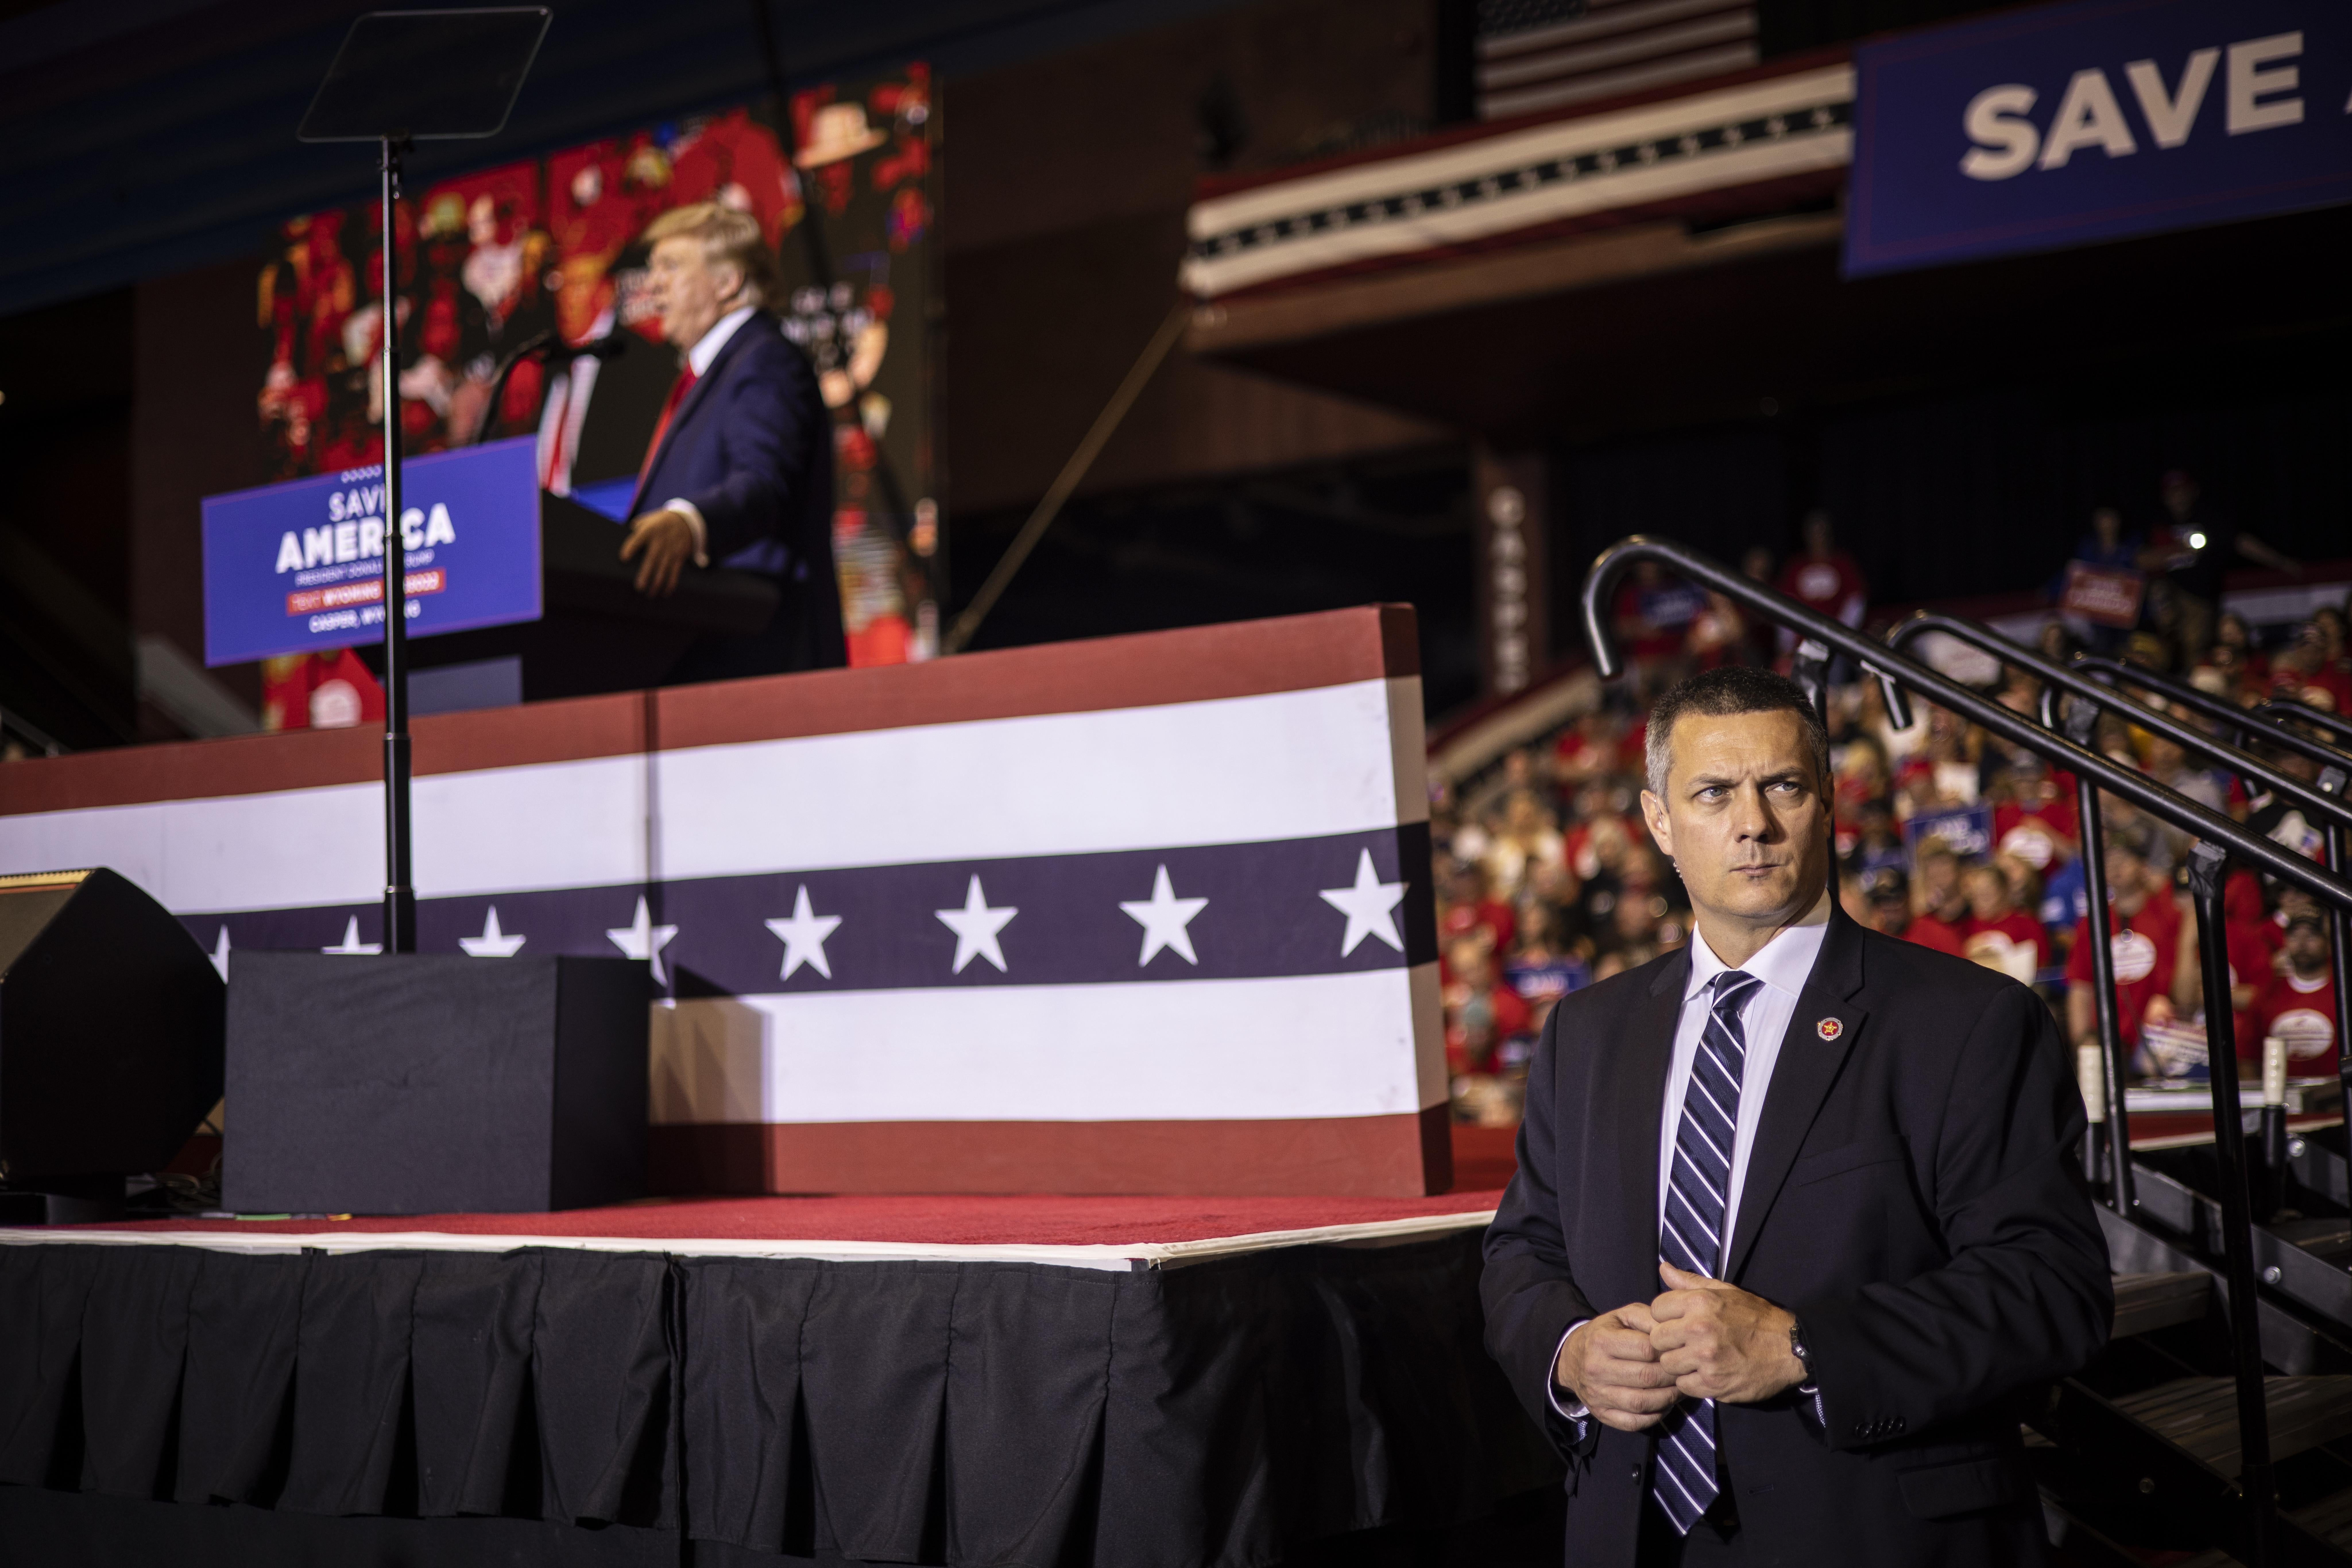 A serious-looking man in a suit stands guard below the stage where Trump speaks at a lectern in front of a crowd